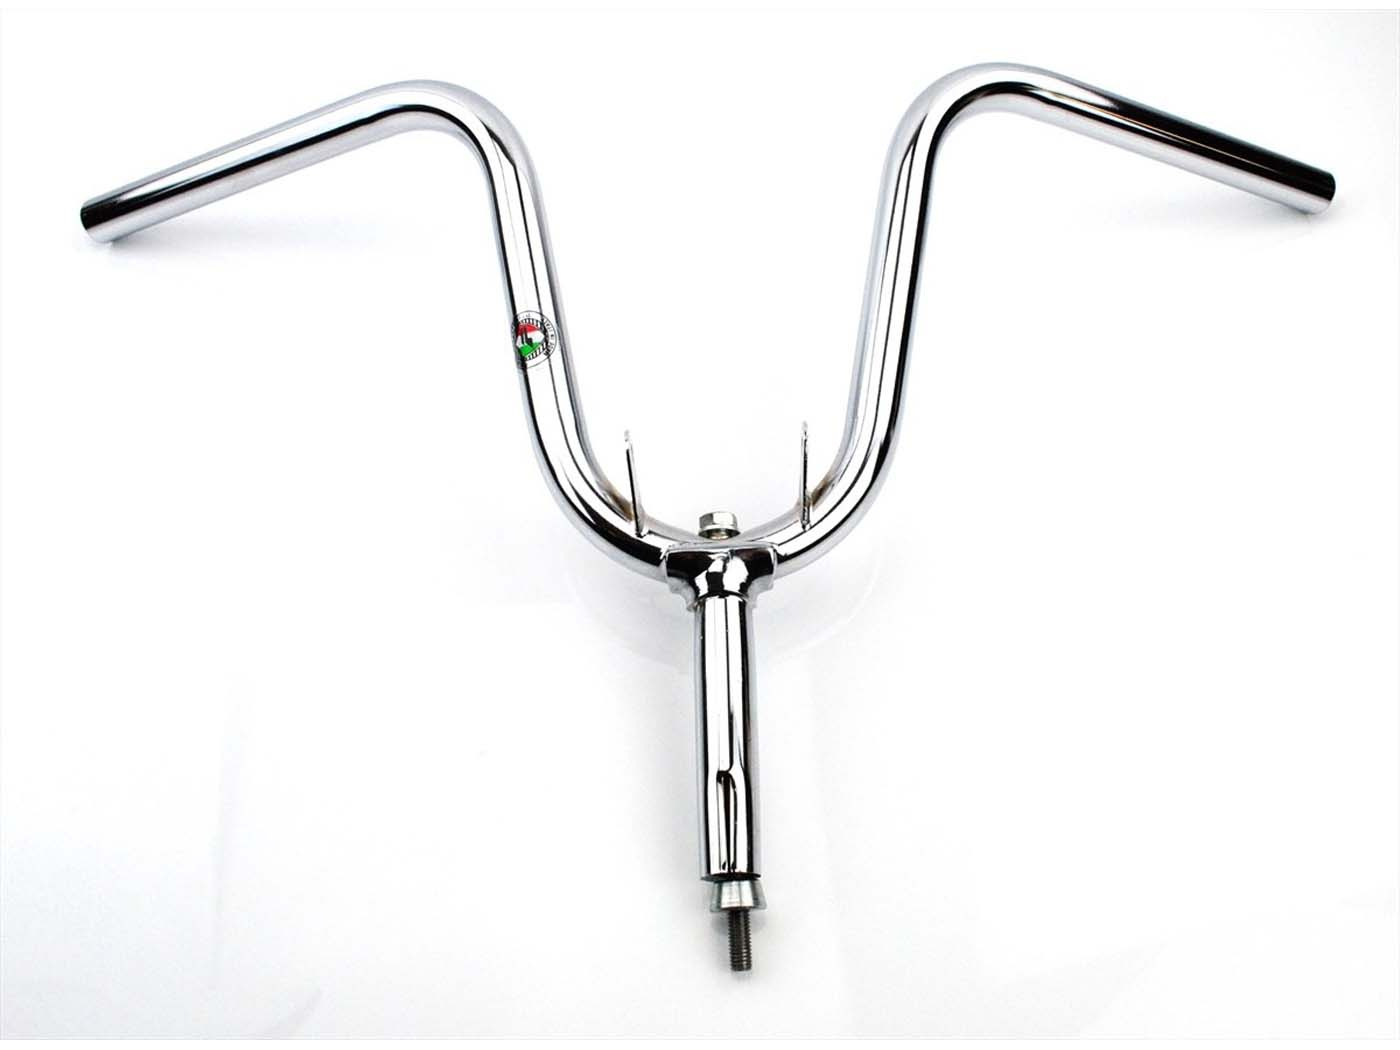 Handlebar Chrome 580mm Wide 200mm High For Piaggio Boxer Moped, Moped